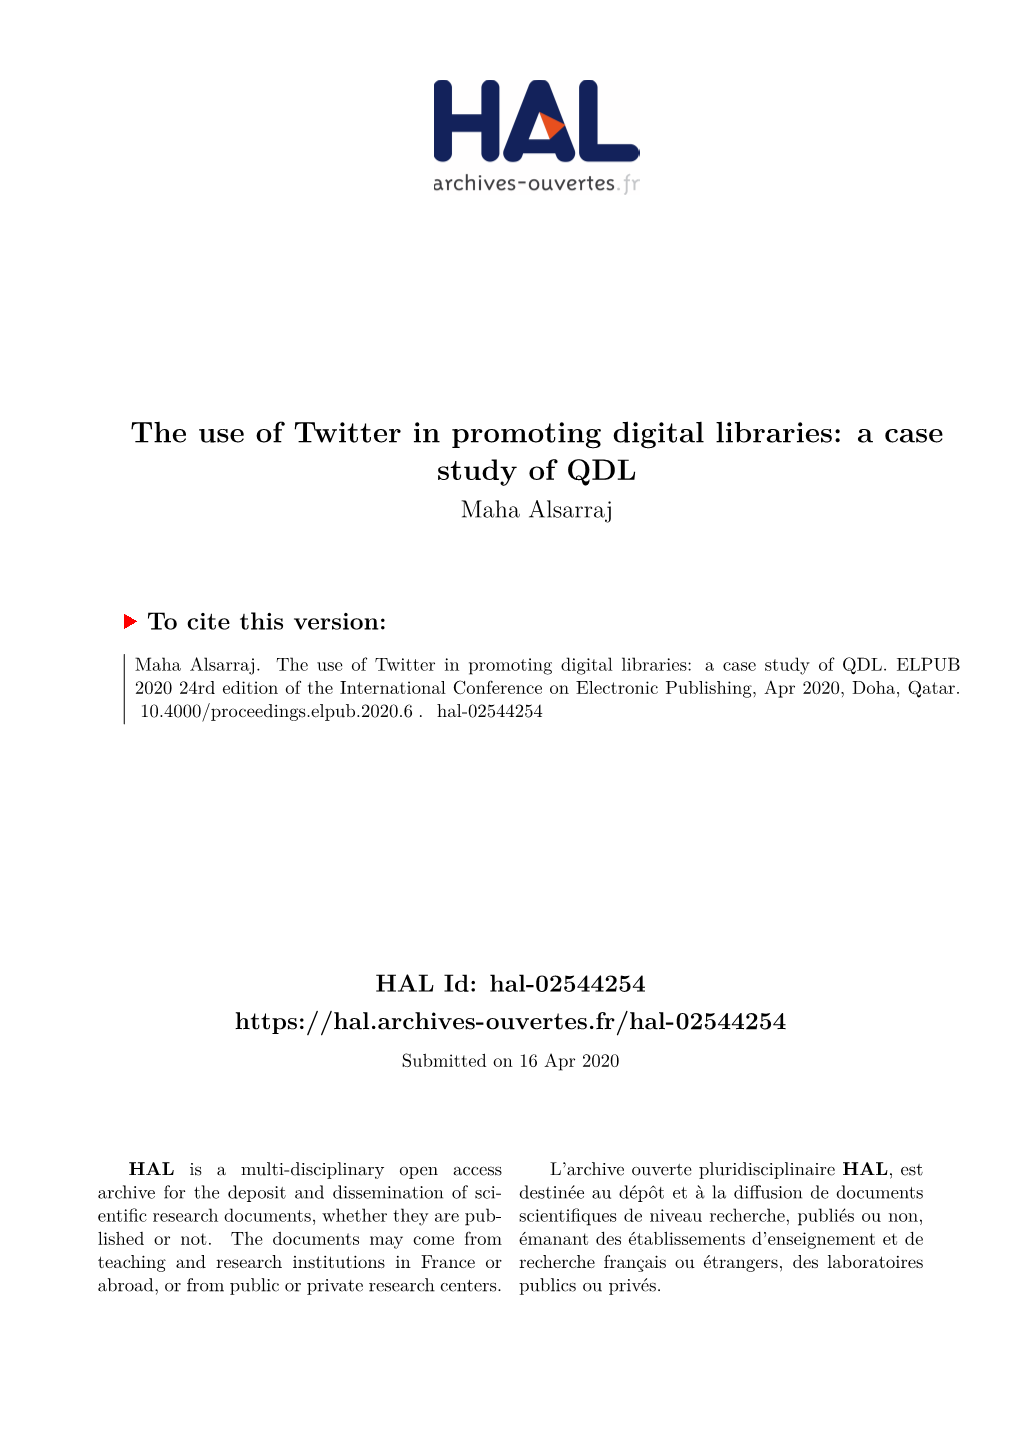 The Use of Twitter in Promoting Digital Libraries: a Case Study of QDL Maha Alsarraj